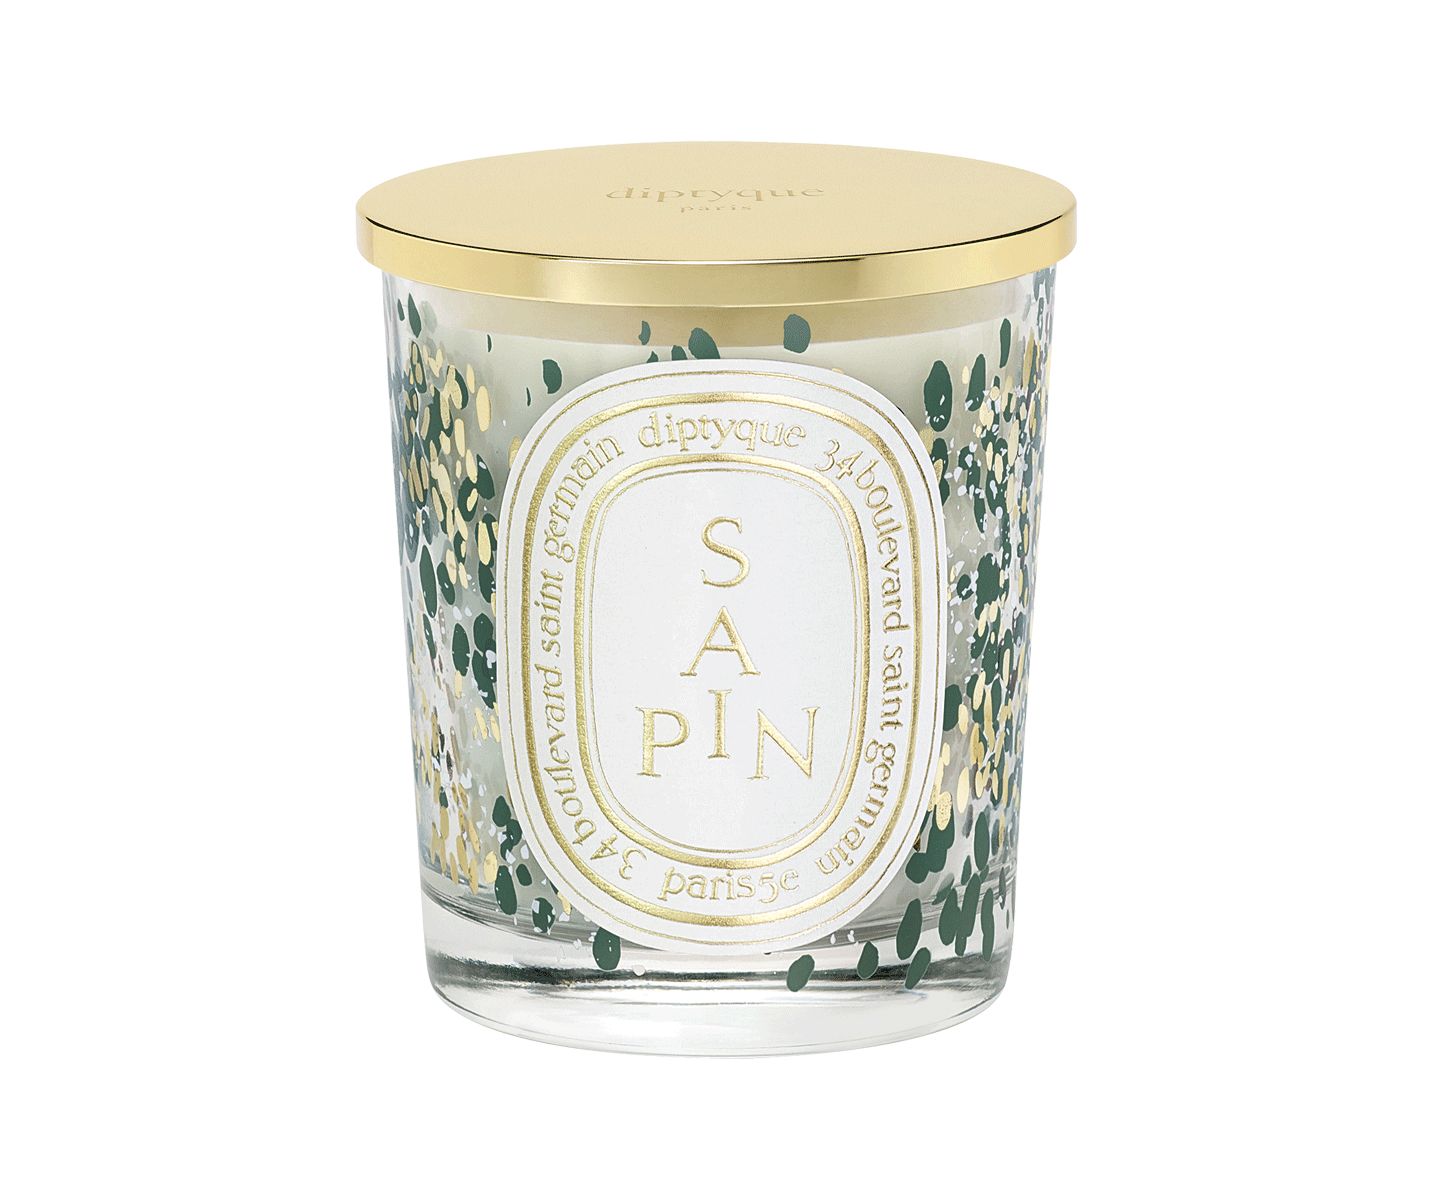 Limited-edition Pine Tree candle 190g | diptyque (US)